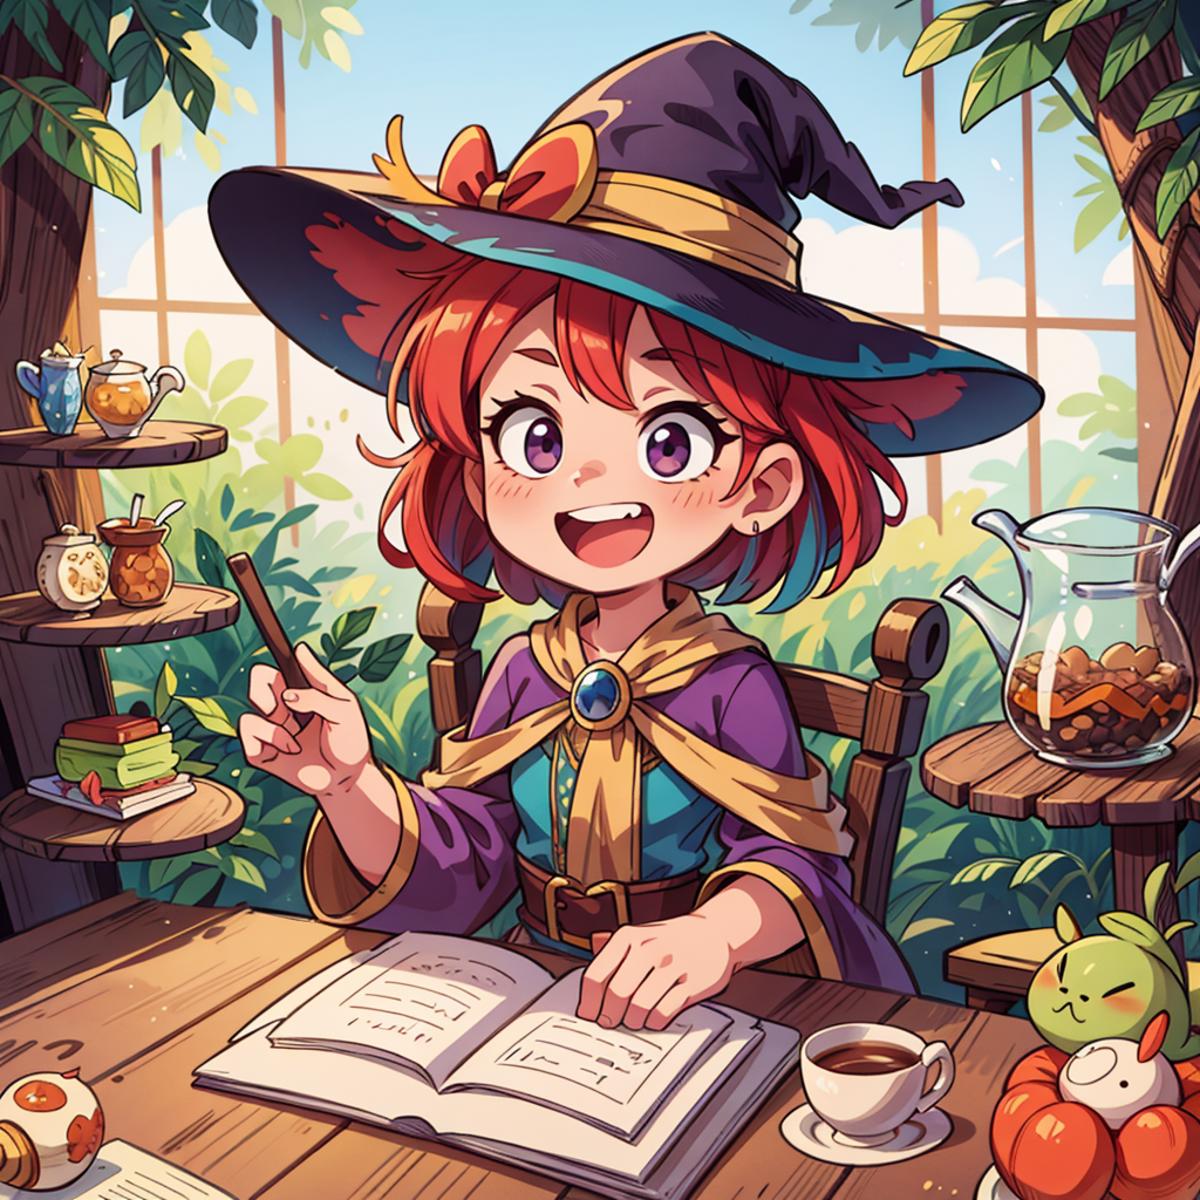 A young girl in a witch's hat holding a wand and reading a book at a table.